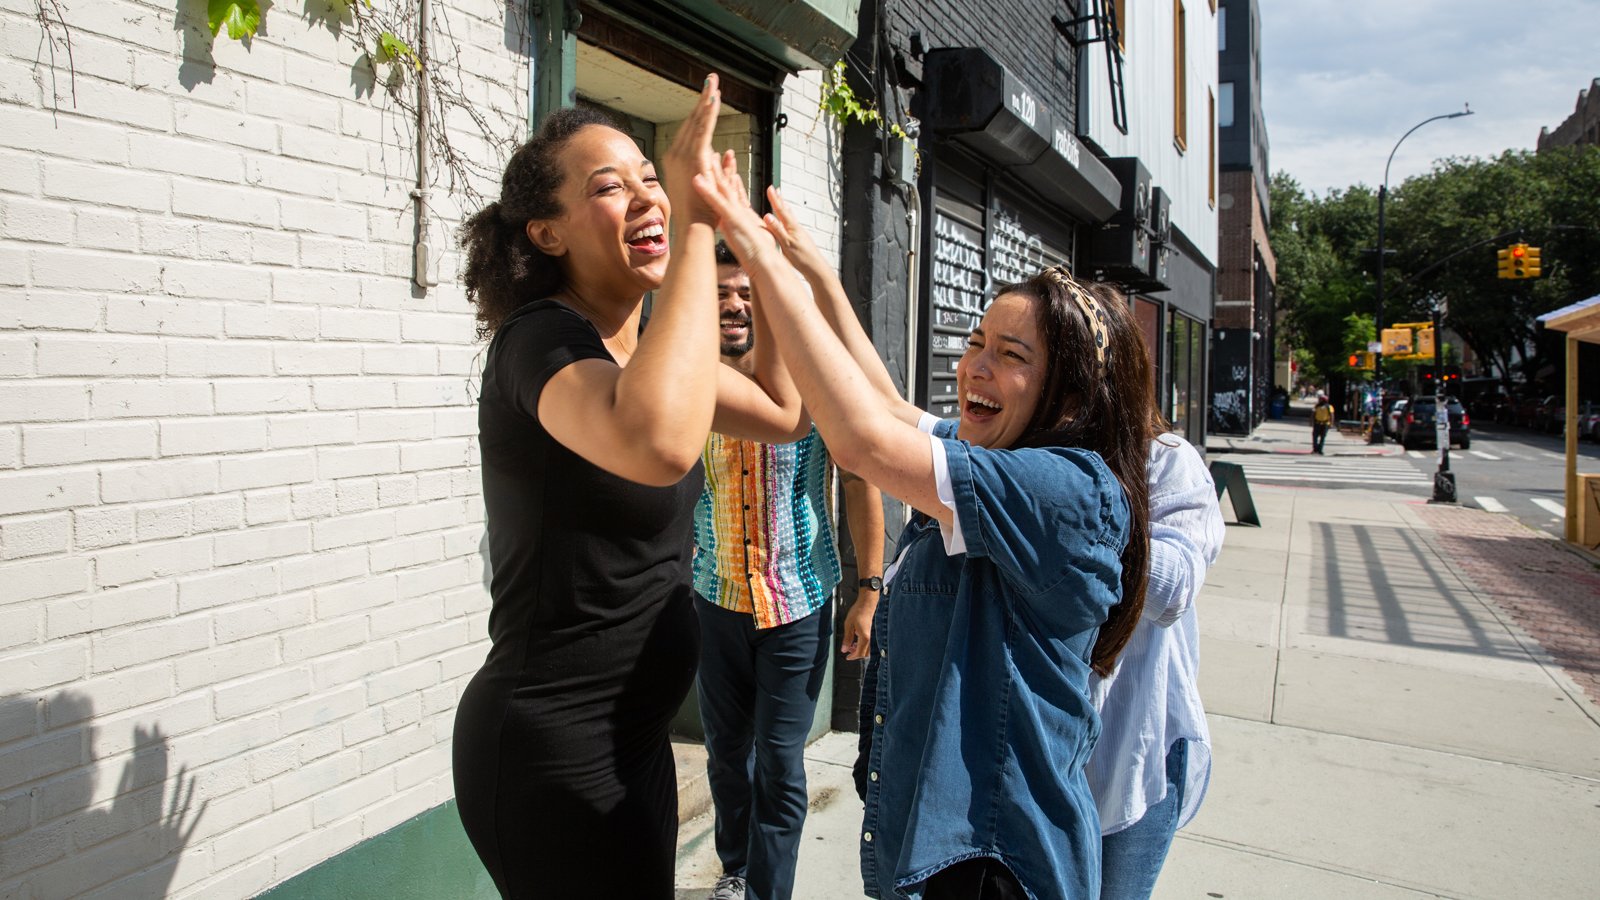 August pals Tirzah Enumah and Alexis Gonzales-Black high-five each other on a New York sidewalk.